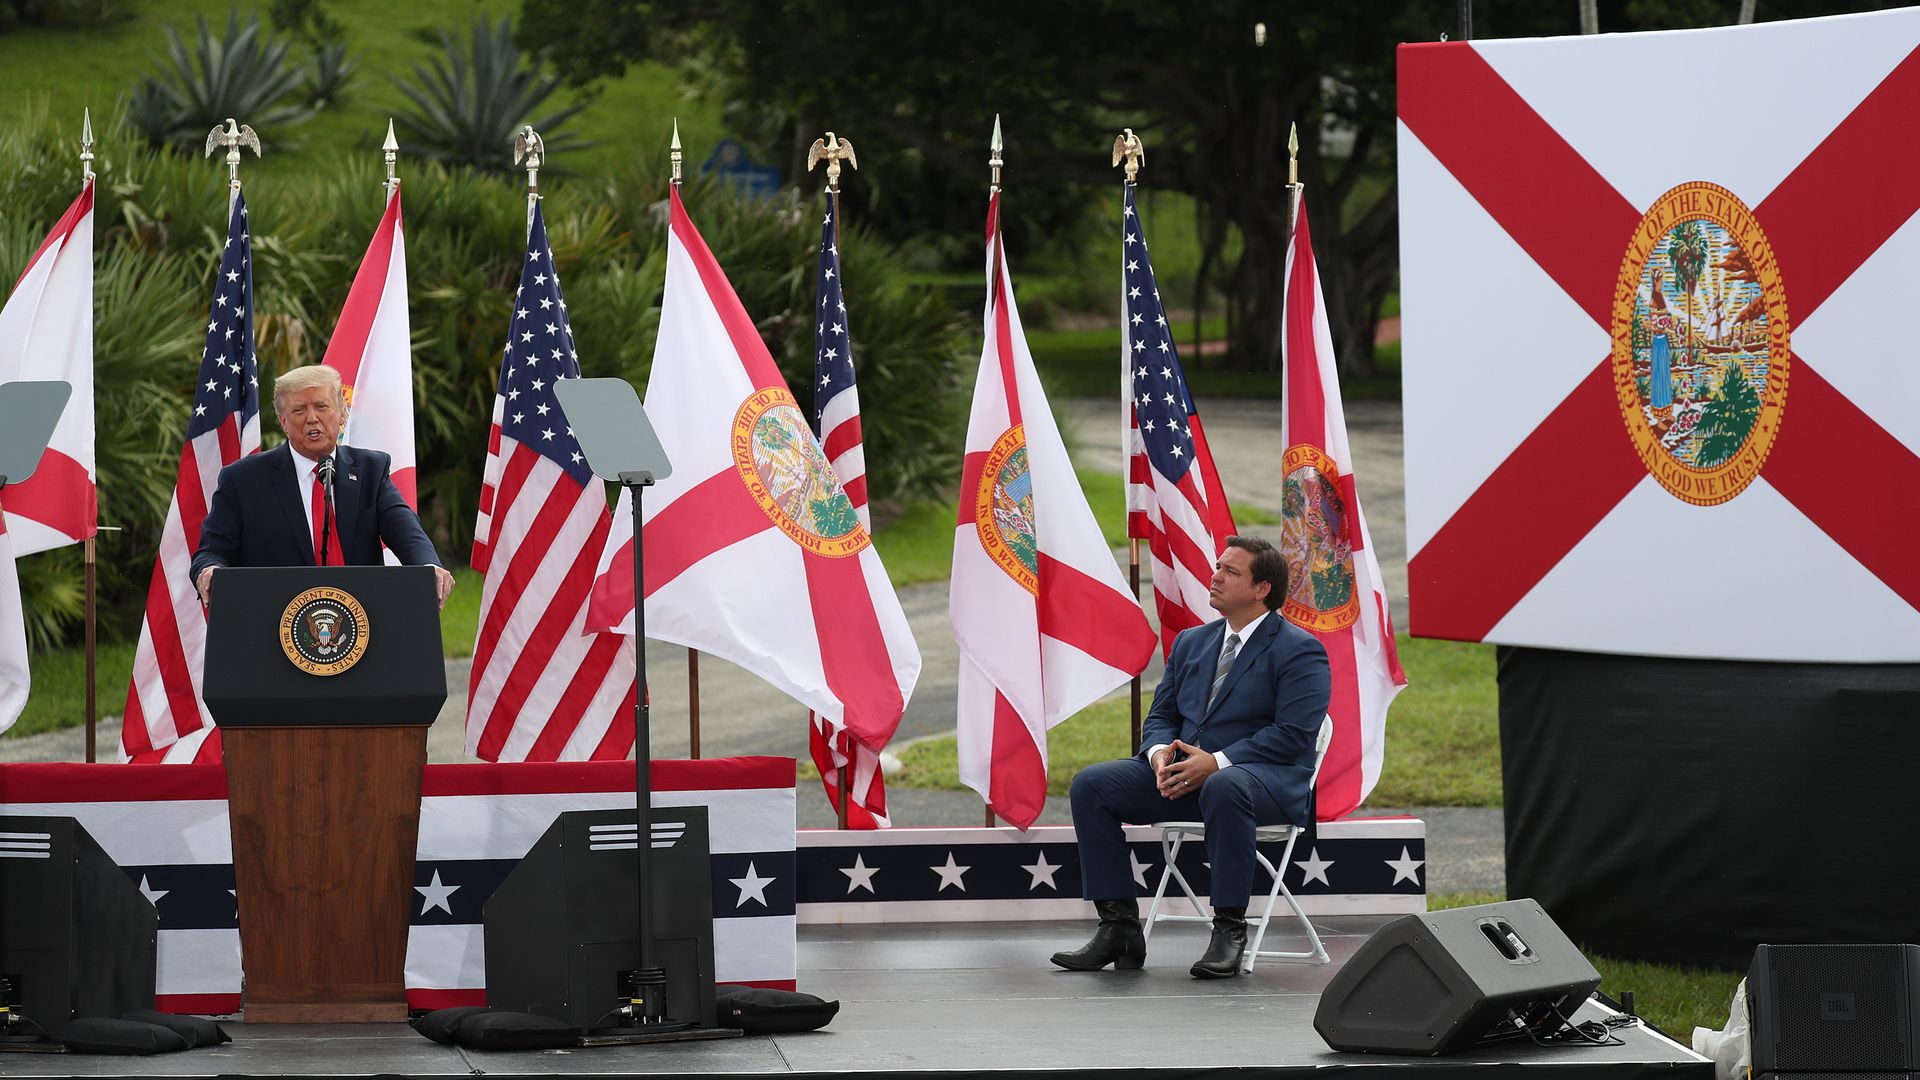 Florida Governor Ron DeSantis listens as President Donald Trump speaks about the environment during a stop at the Jupiter Inlet Lighthouse on September 08, 2020 in Jupiter, Florida.